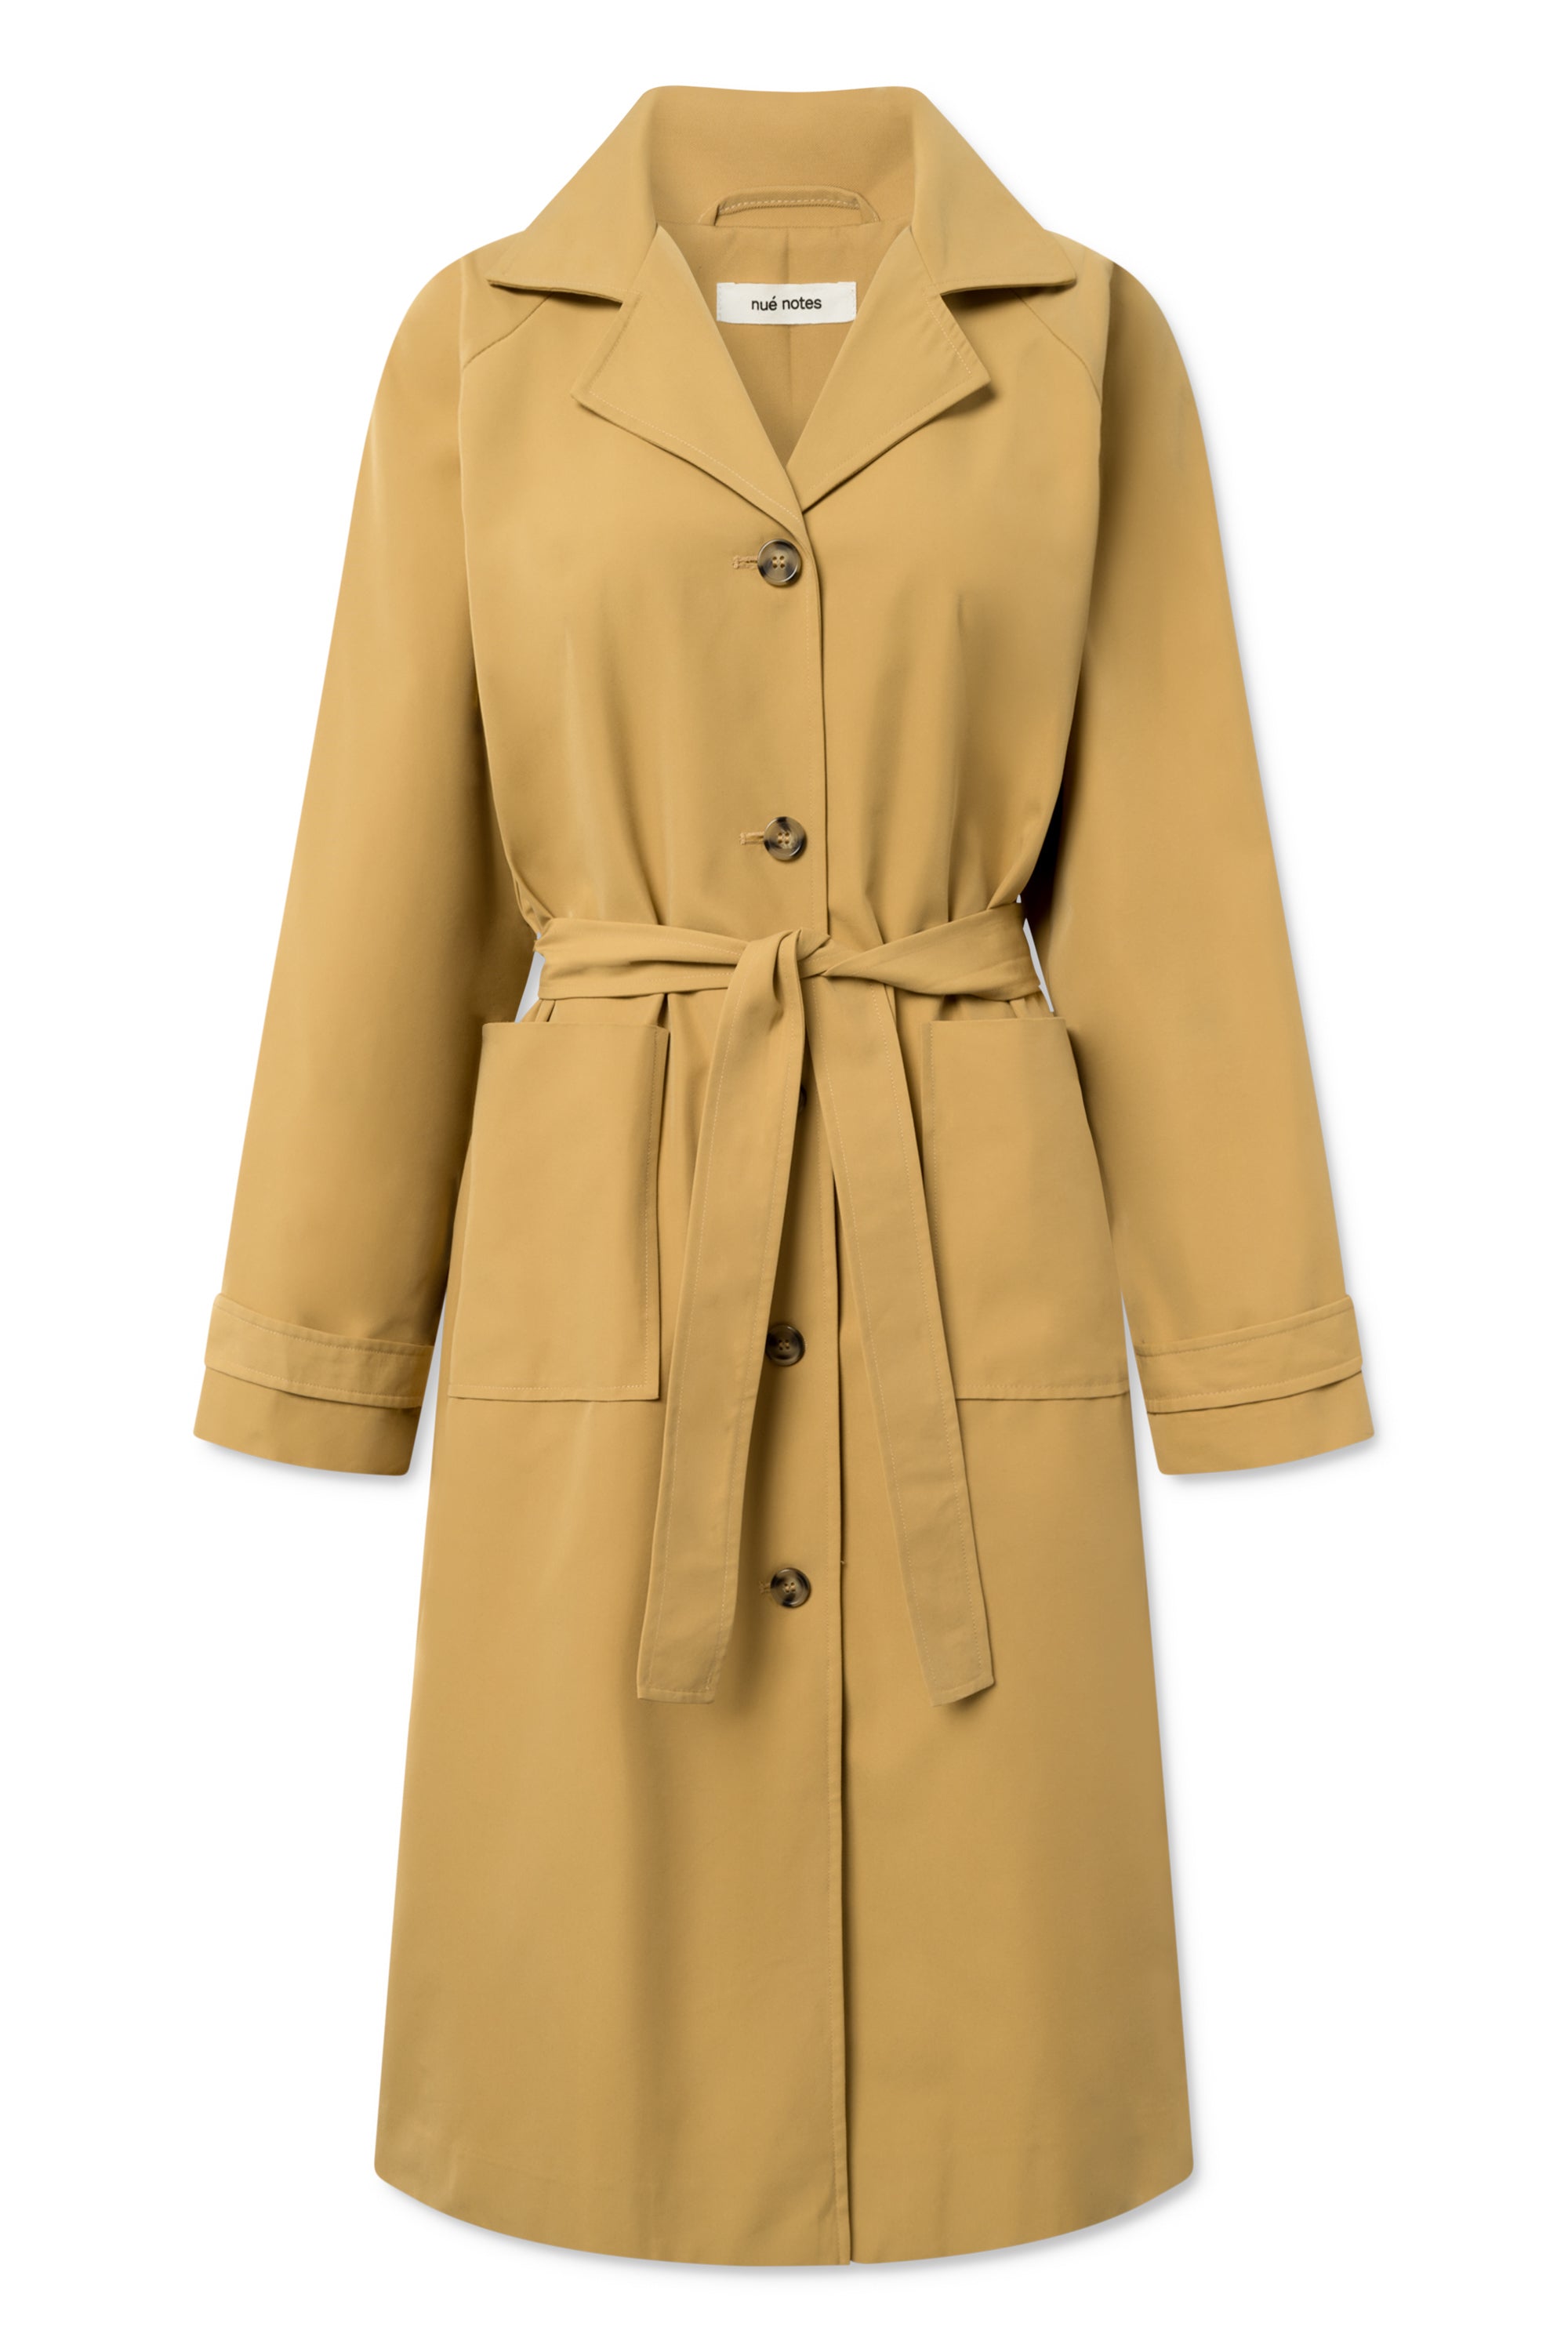 nué notes Alfred Coat OUTERWEAR 151 Antelope